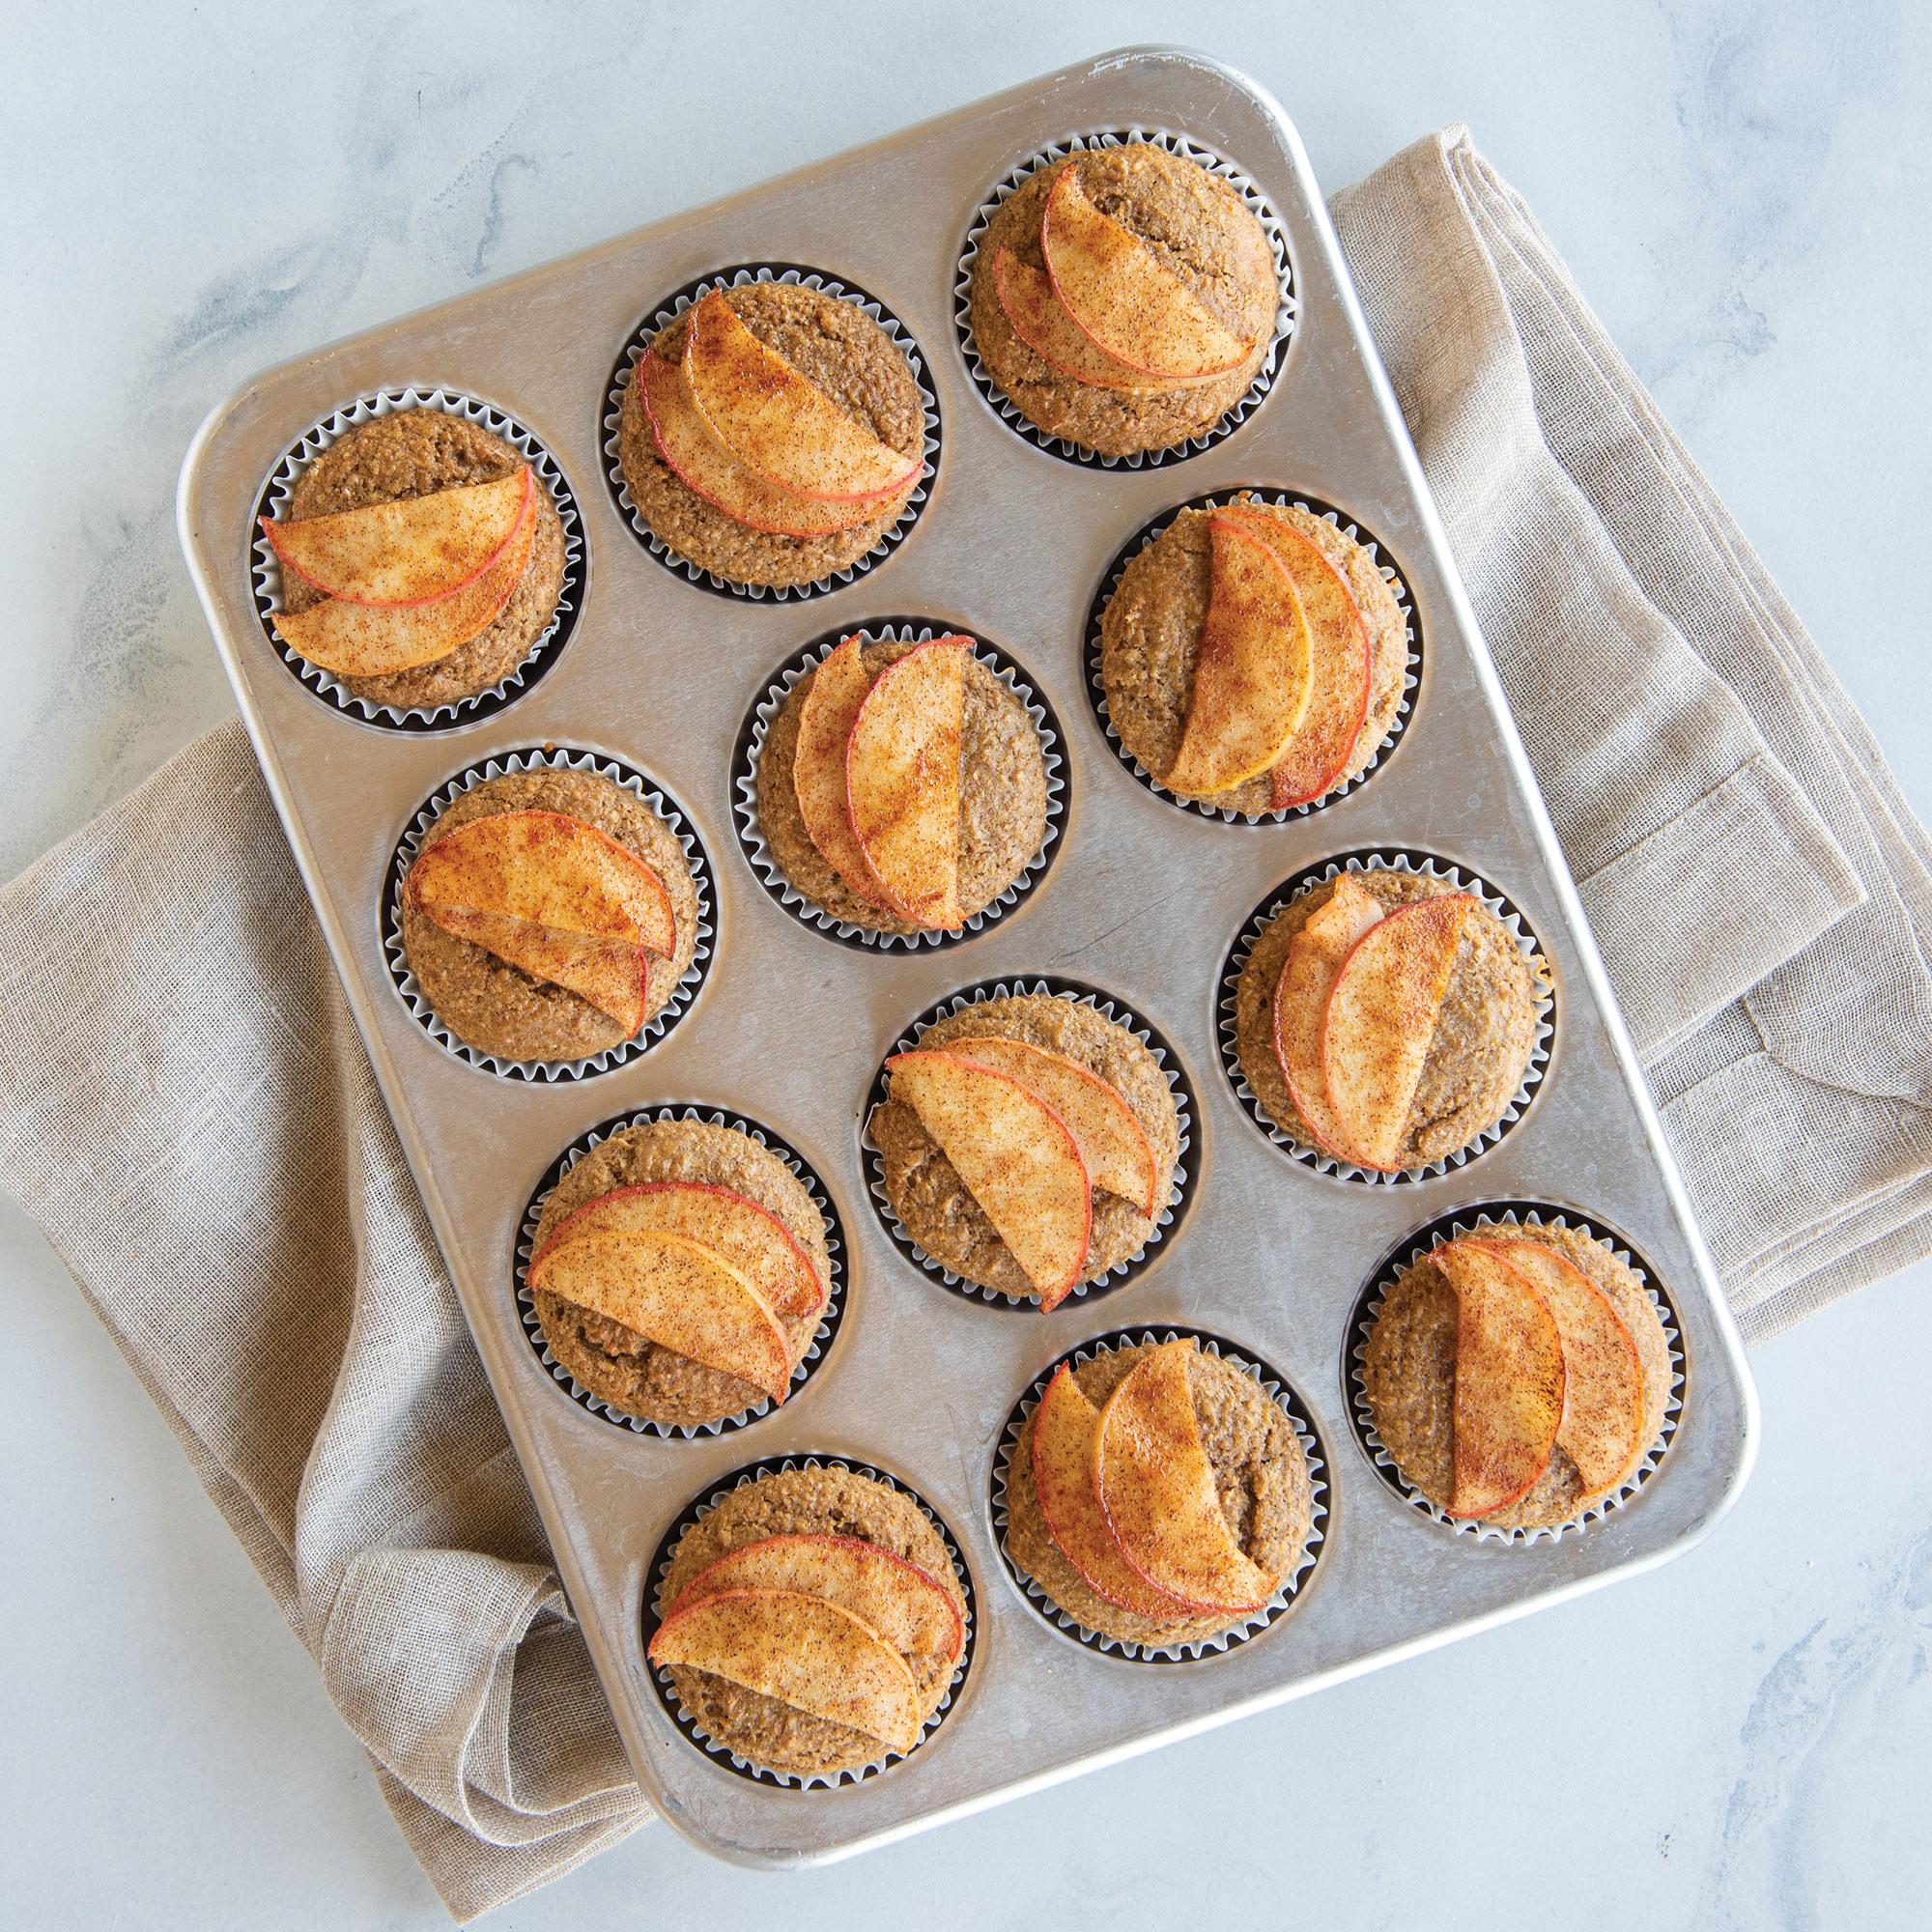 Nordic Ware Naturals Muffin Pan 12 Cup Image 3